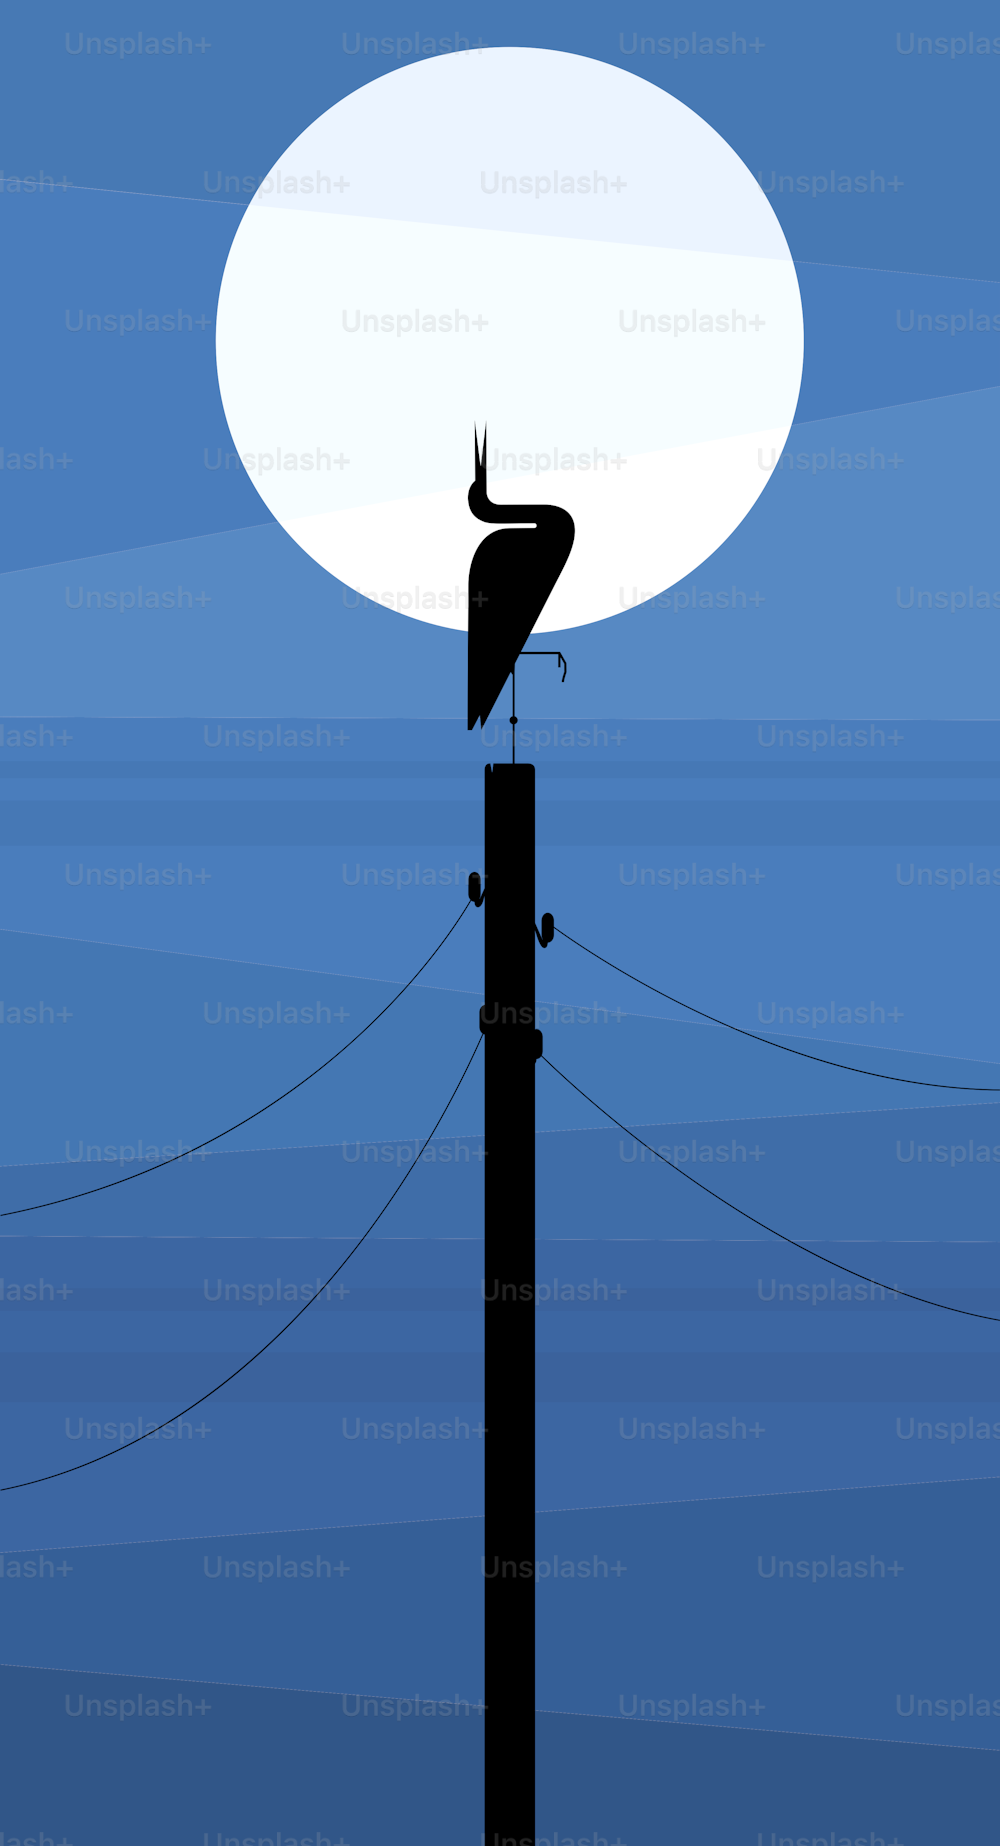 Silhouette of a stork on a power line pole against the background of the evening sky, stylized image, vector illustration